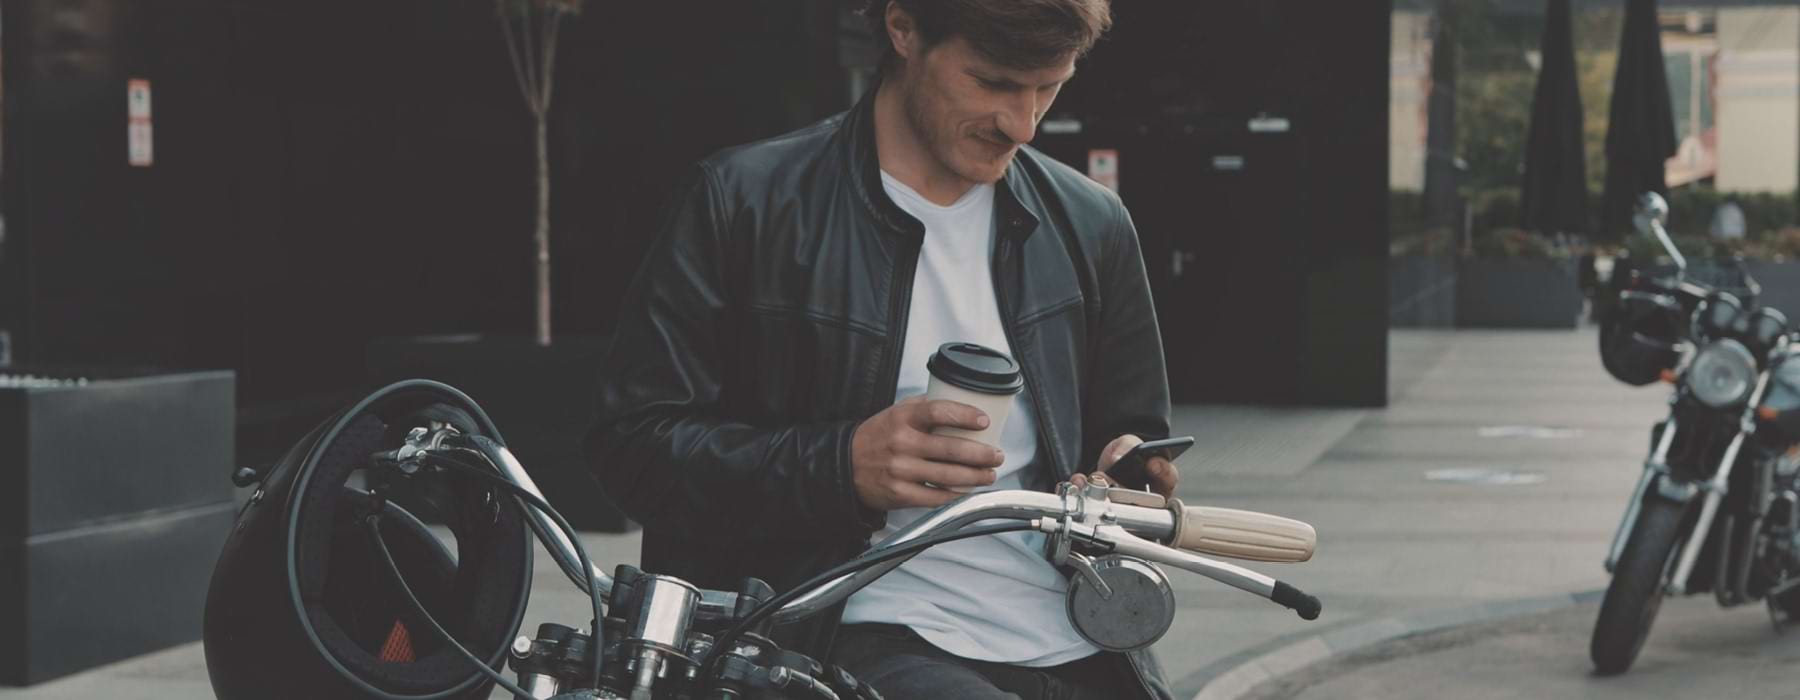 man sits on parked motorcycle and texts with cup of coffee in hand